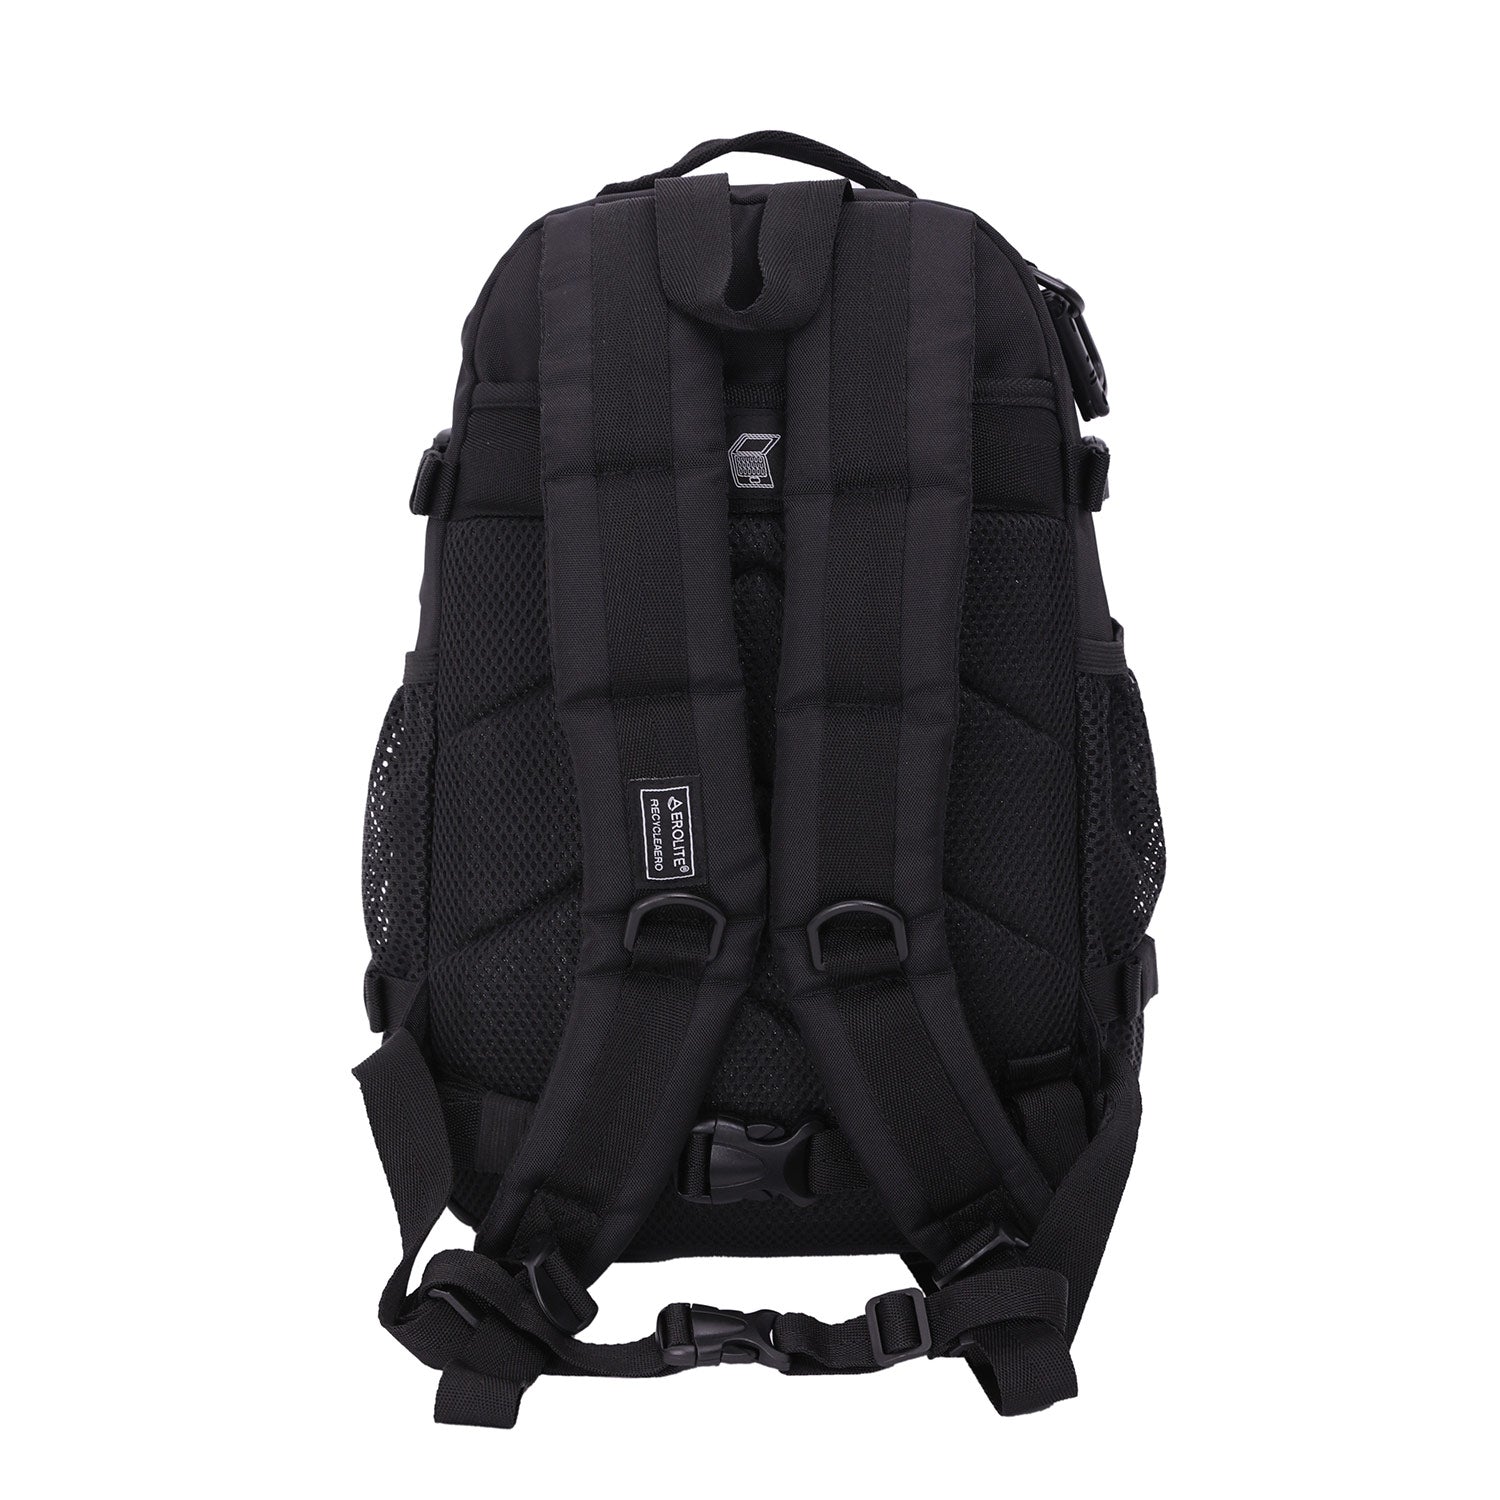 Aerolite 40x20x25 Ryanair Maximum Size Tactical Backpack Eco-Friendly Shower-Resistant Cabin Luggage Camping Hiking Trekking 20L Approved Travel Carry On Flight Rucksack with 10 Year Warranty